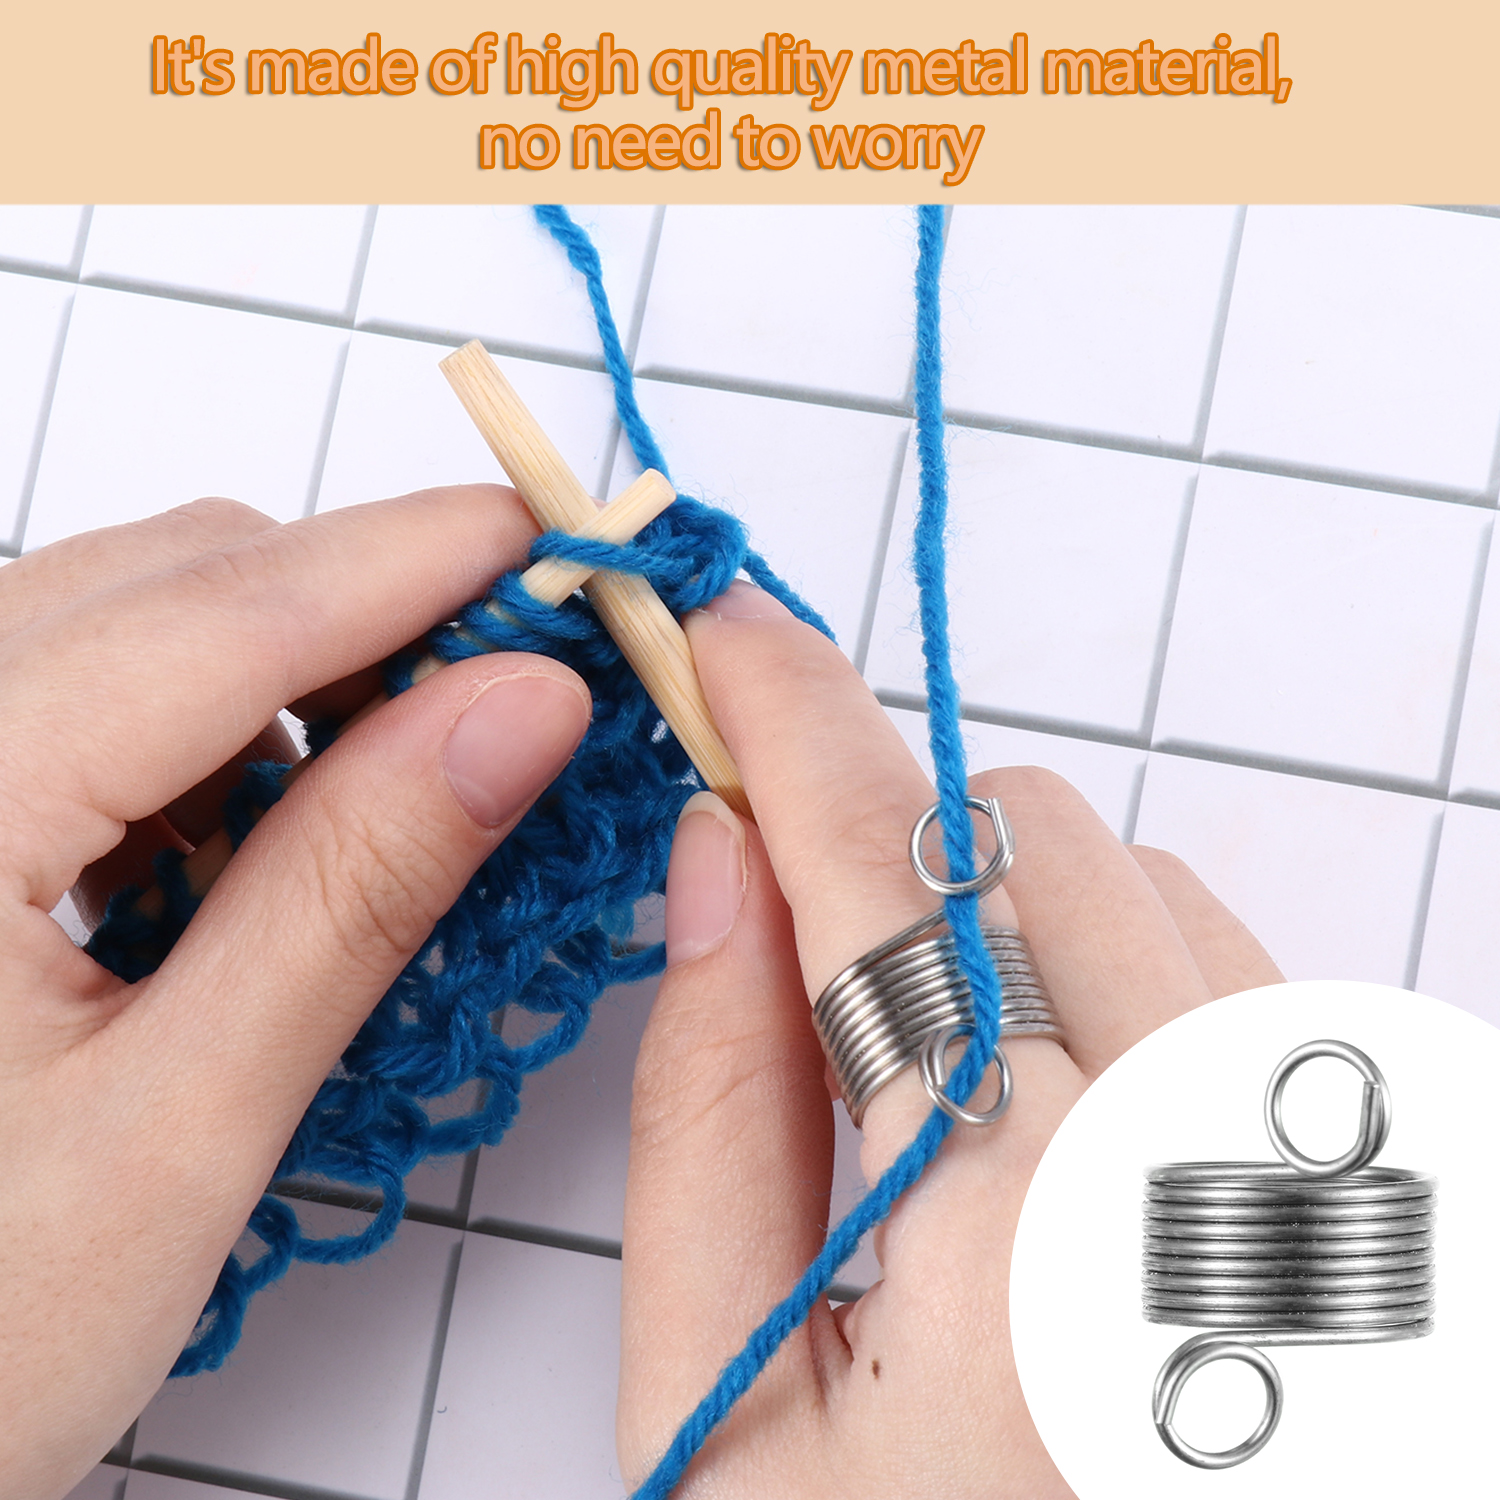 Suchen 7 Pieces Diy Adjustable Knitting Loop Ring Finger Wear Yarn Guide Finger Holder Crochet Loop Peacock Yarn Guides Sewing Hook Knitting Tools Sewing Accessories Thimble Open Ring 107